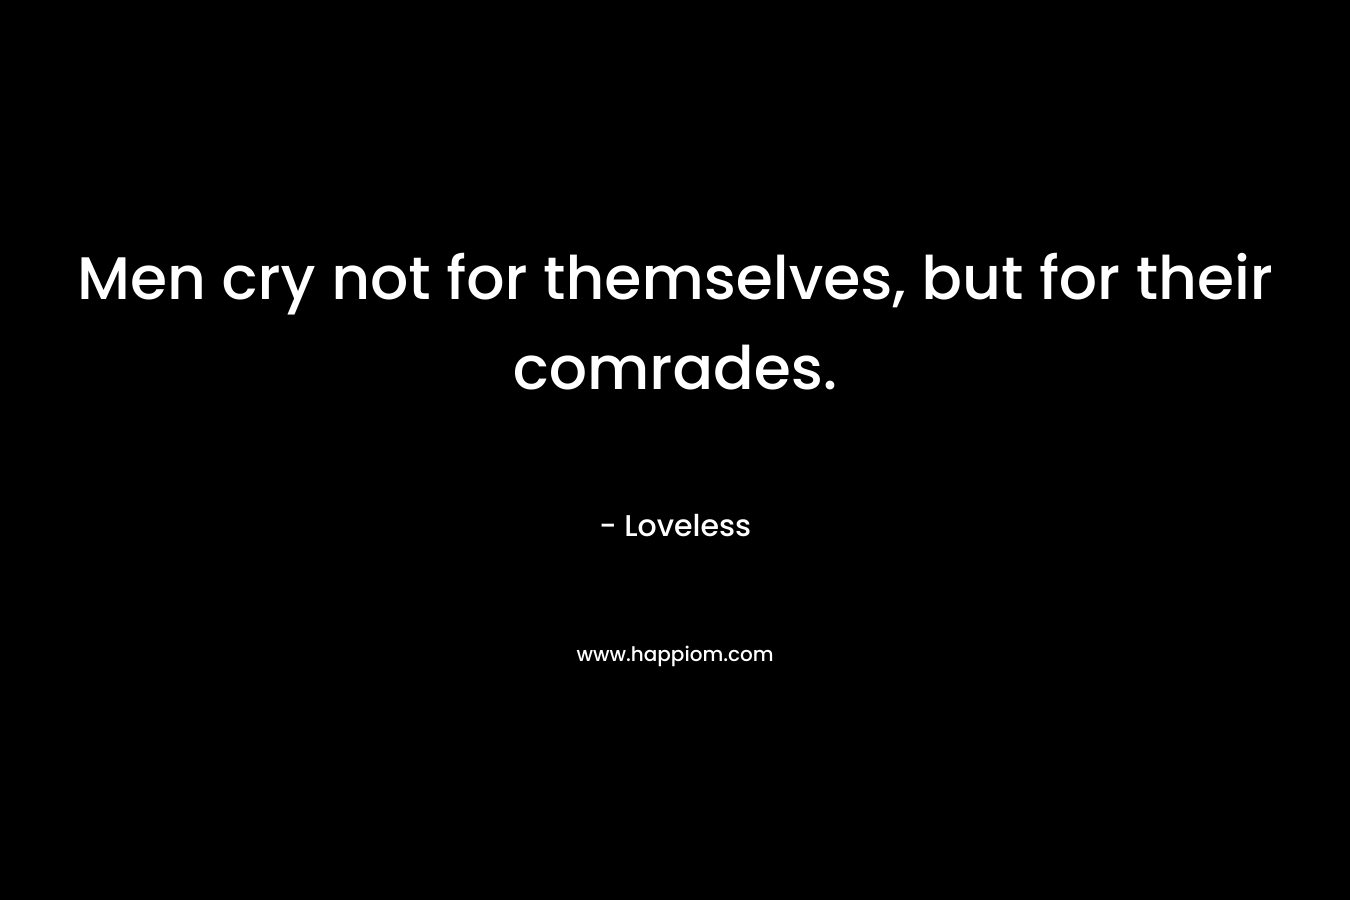 Men cry not for themselves, but for their comrades. – Loveless